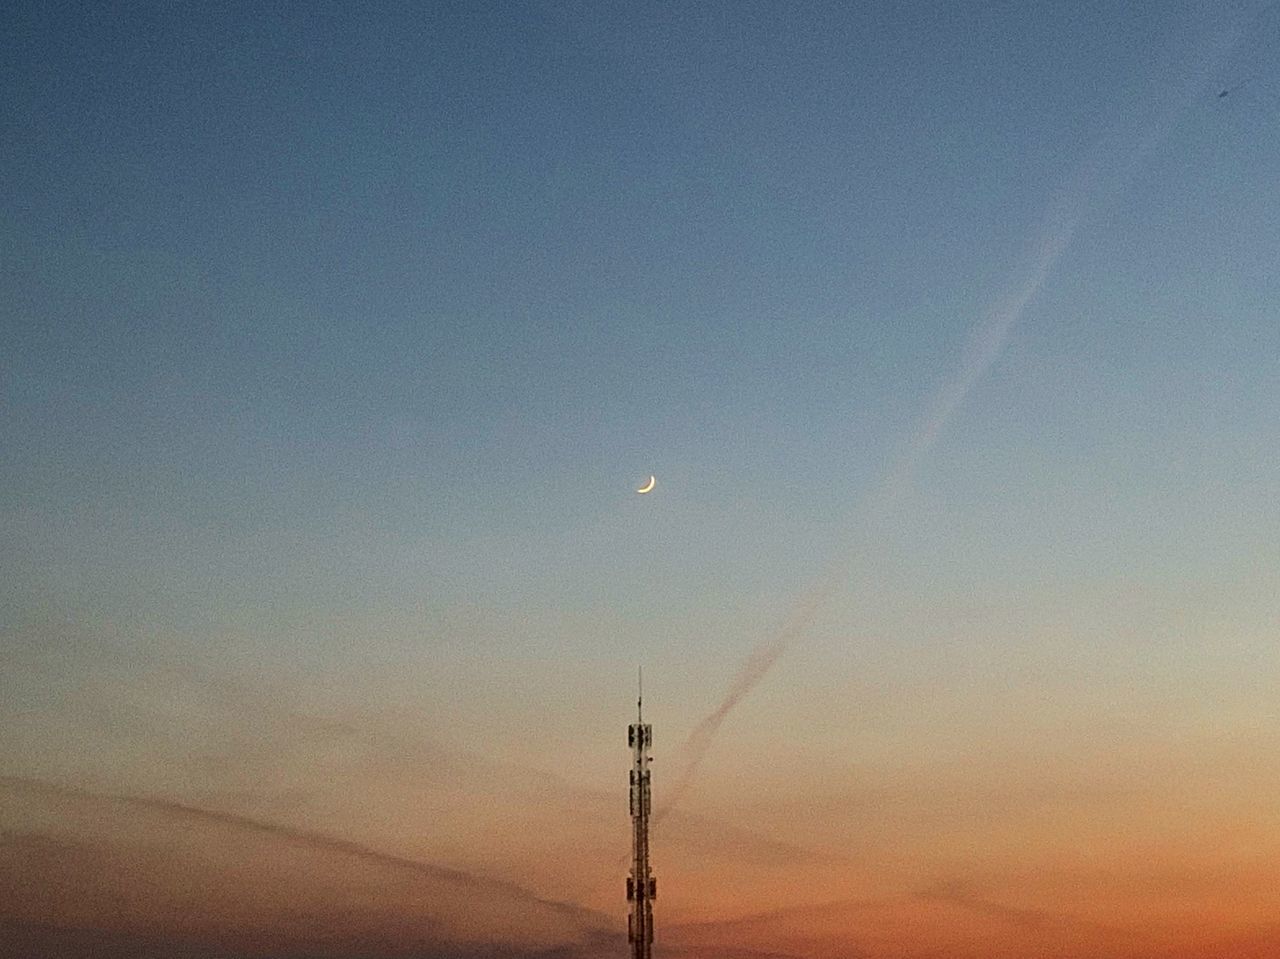 sky, tower, sunset, moon, nature, beauty in nature, built structure, technology, cloud - sky, architecture, no people, tall - high, dusk, scenics - nature, communication, low angle view, tranquility, tranquil scene, outdoors, global communications, spire